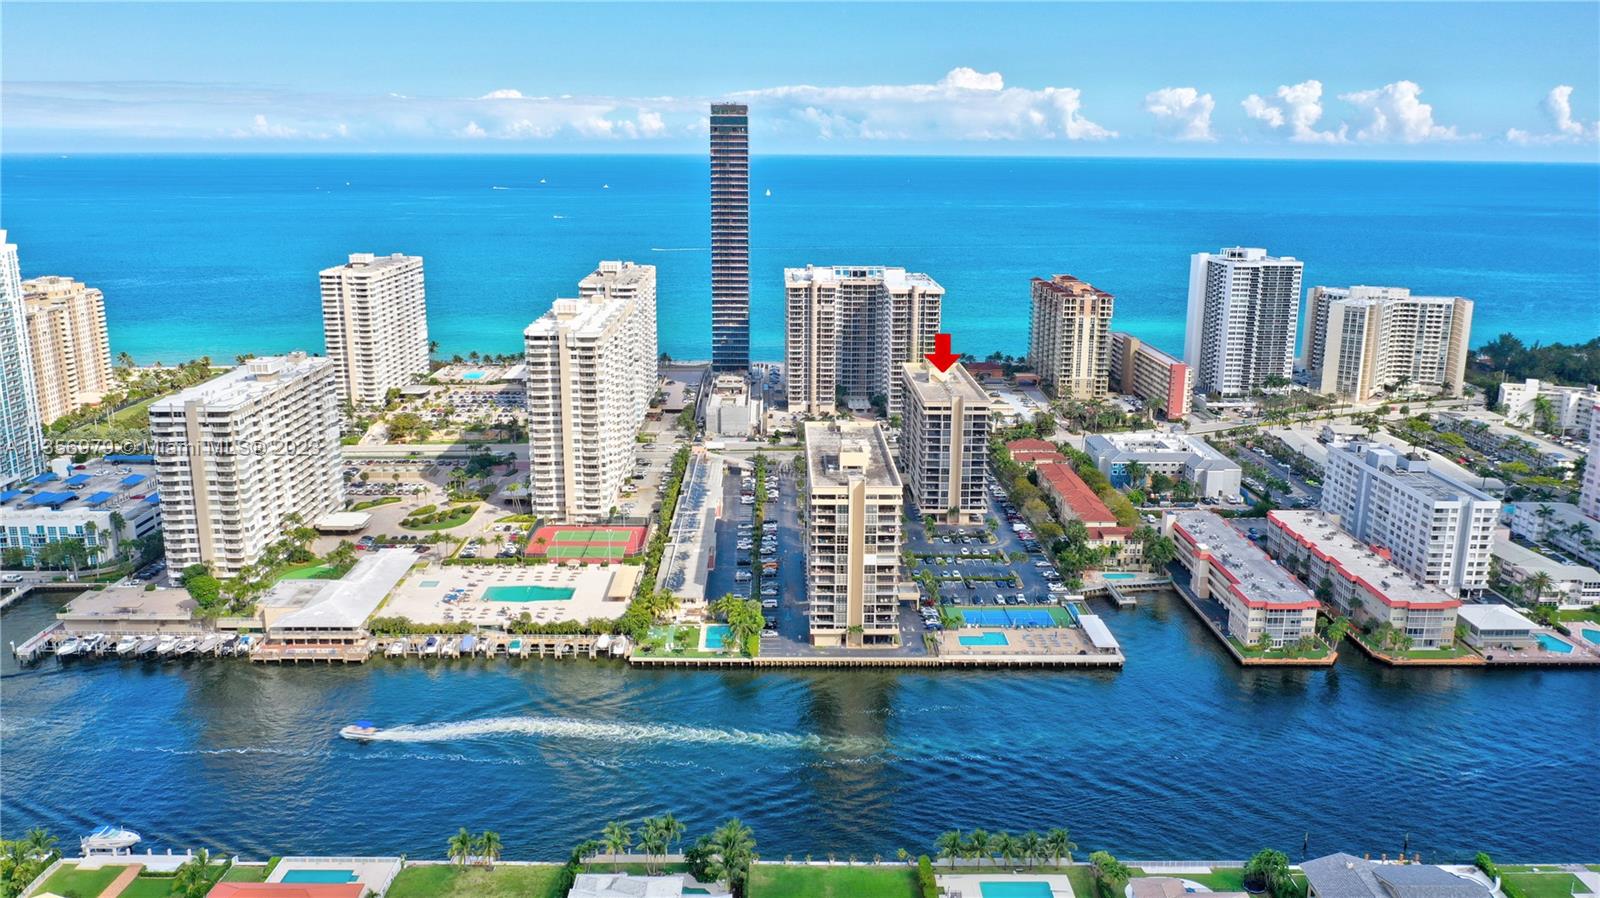 Parker Dorado is located on the ocean at the end of Hallandale Beach  entering Golden Beach